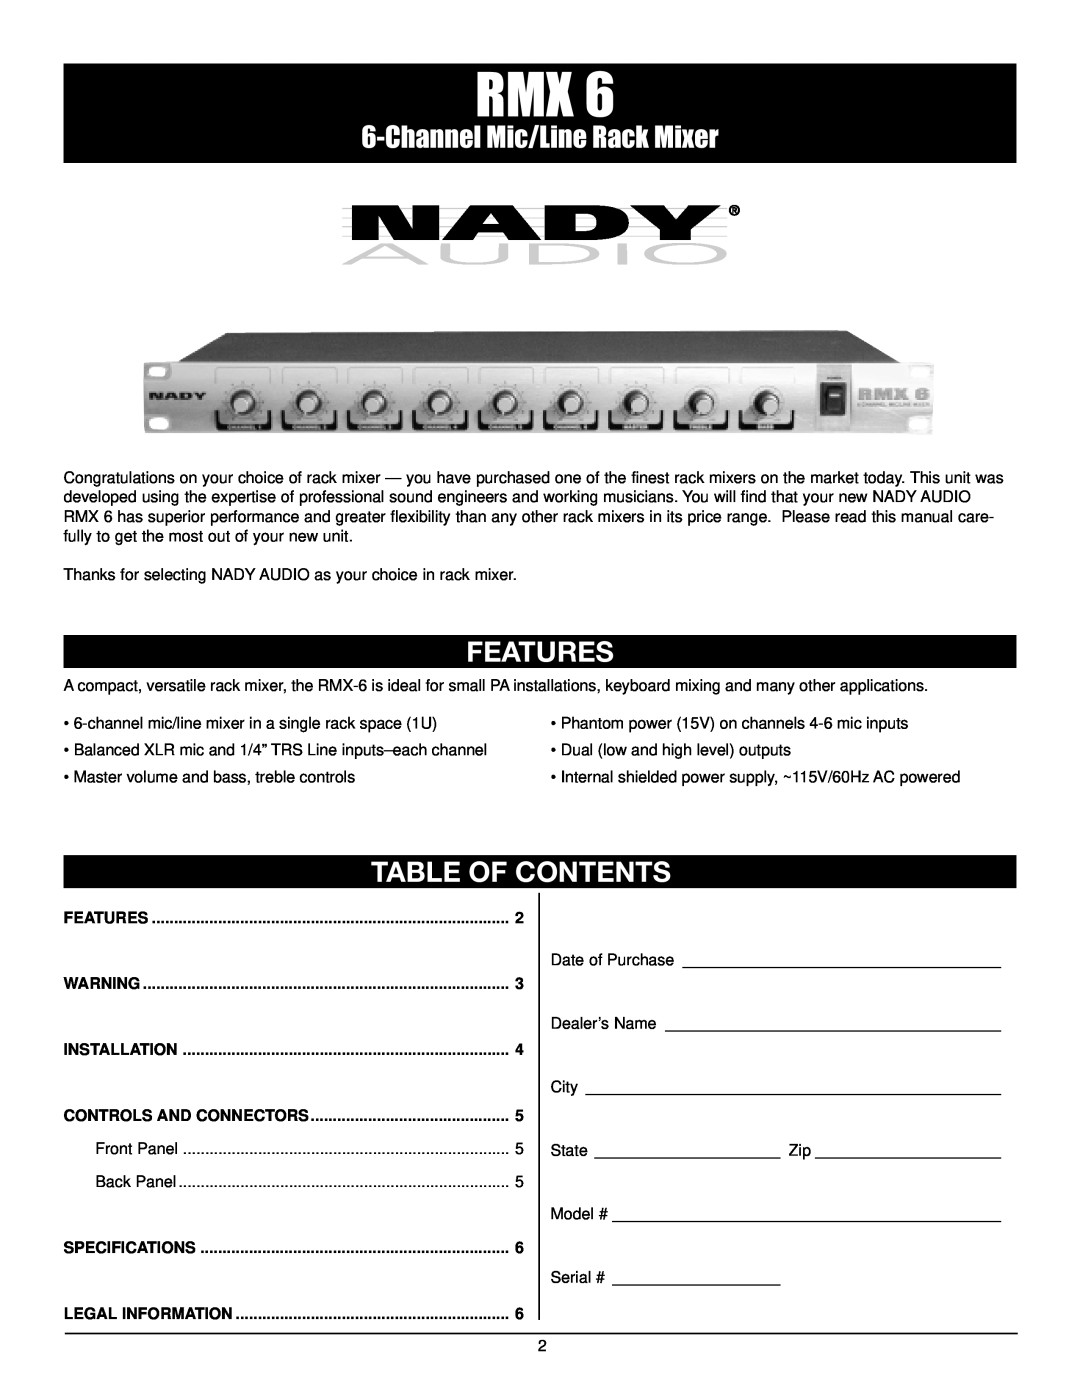 Nady Systems RMX6 owner manual Features, Table Of Contents, ChannelMic/Line Rack Mixer 